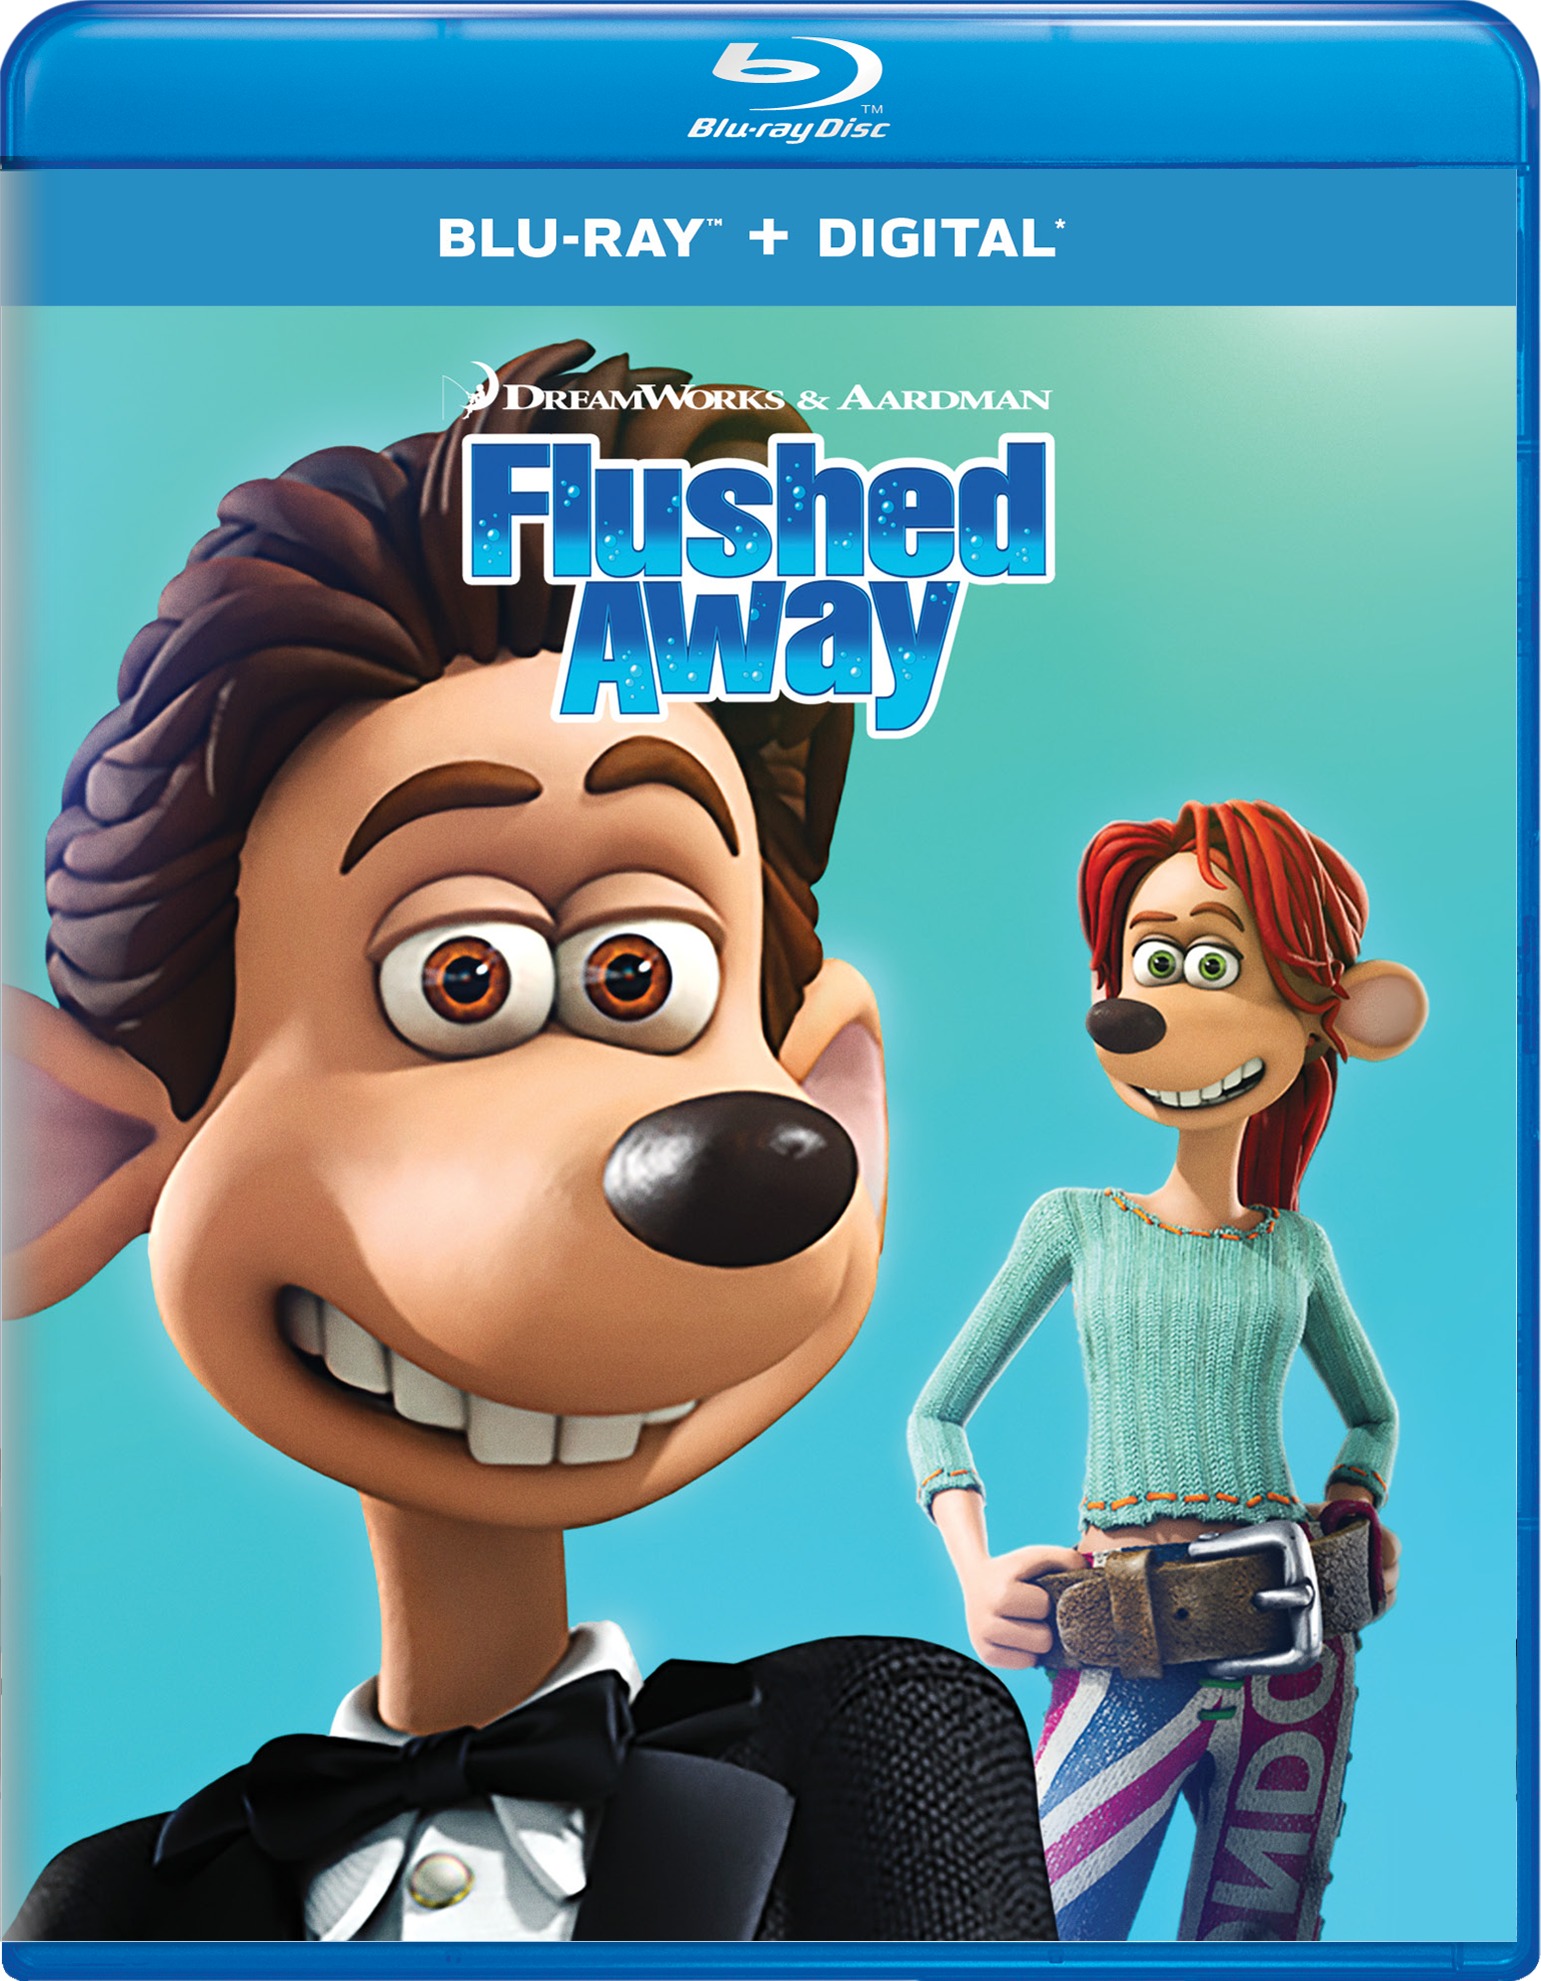 Universal Flushed Away and Shark Tale Heading to Bluray (UPDATED)